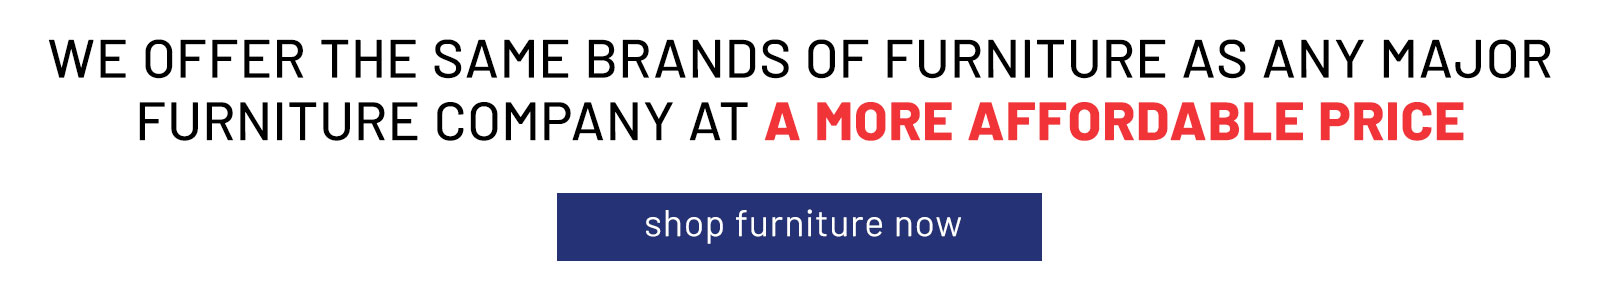 WE OFFER THE SAME BRANDS OF FURNITURE AS ANY MAJOR FURNITURE COMPANY at a more affordable price 